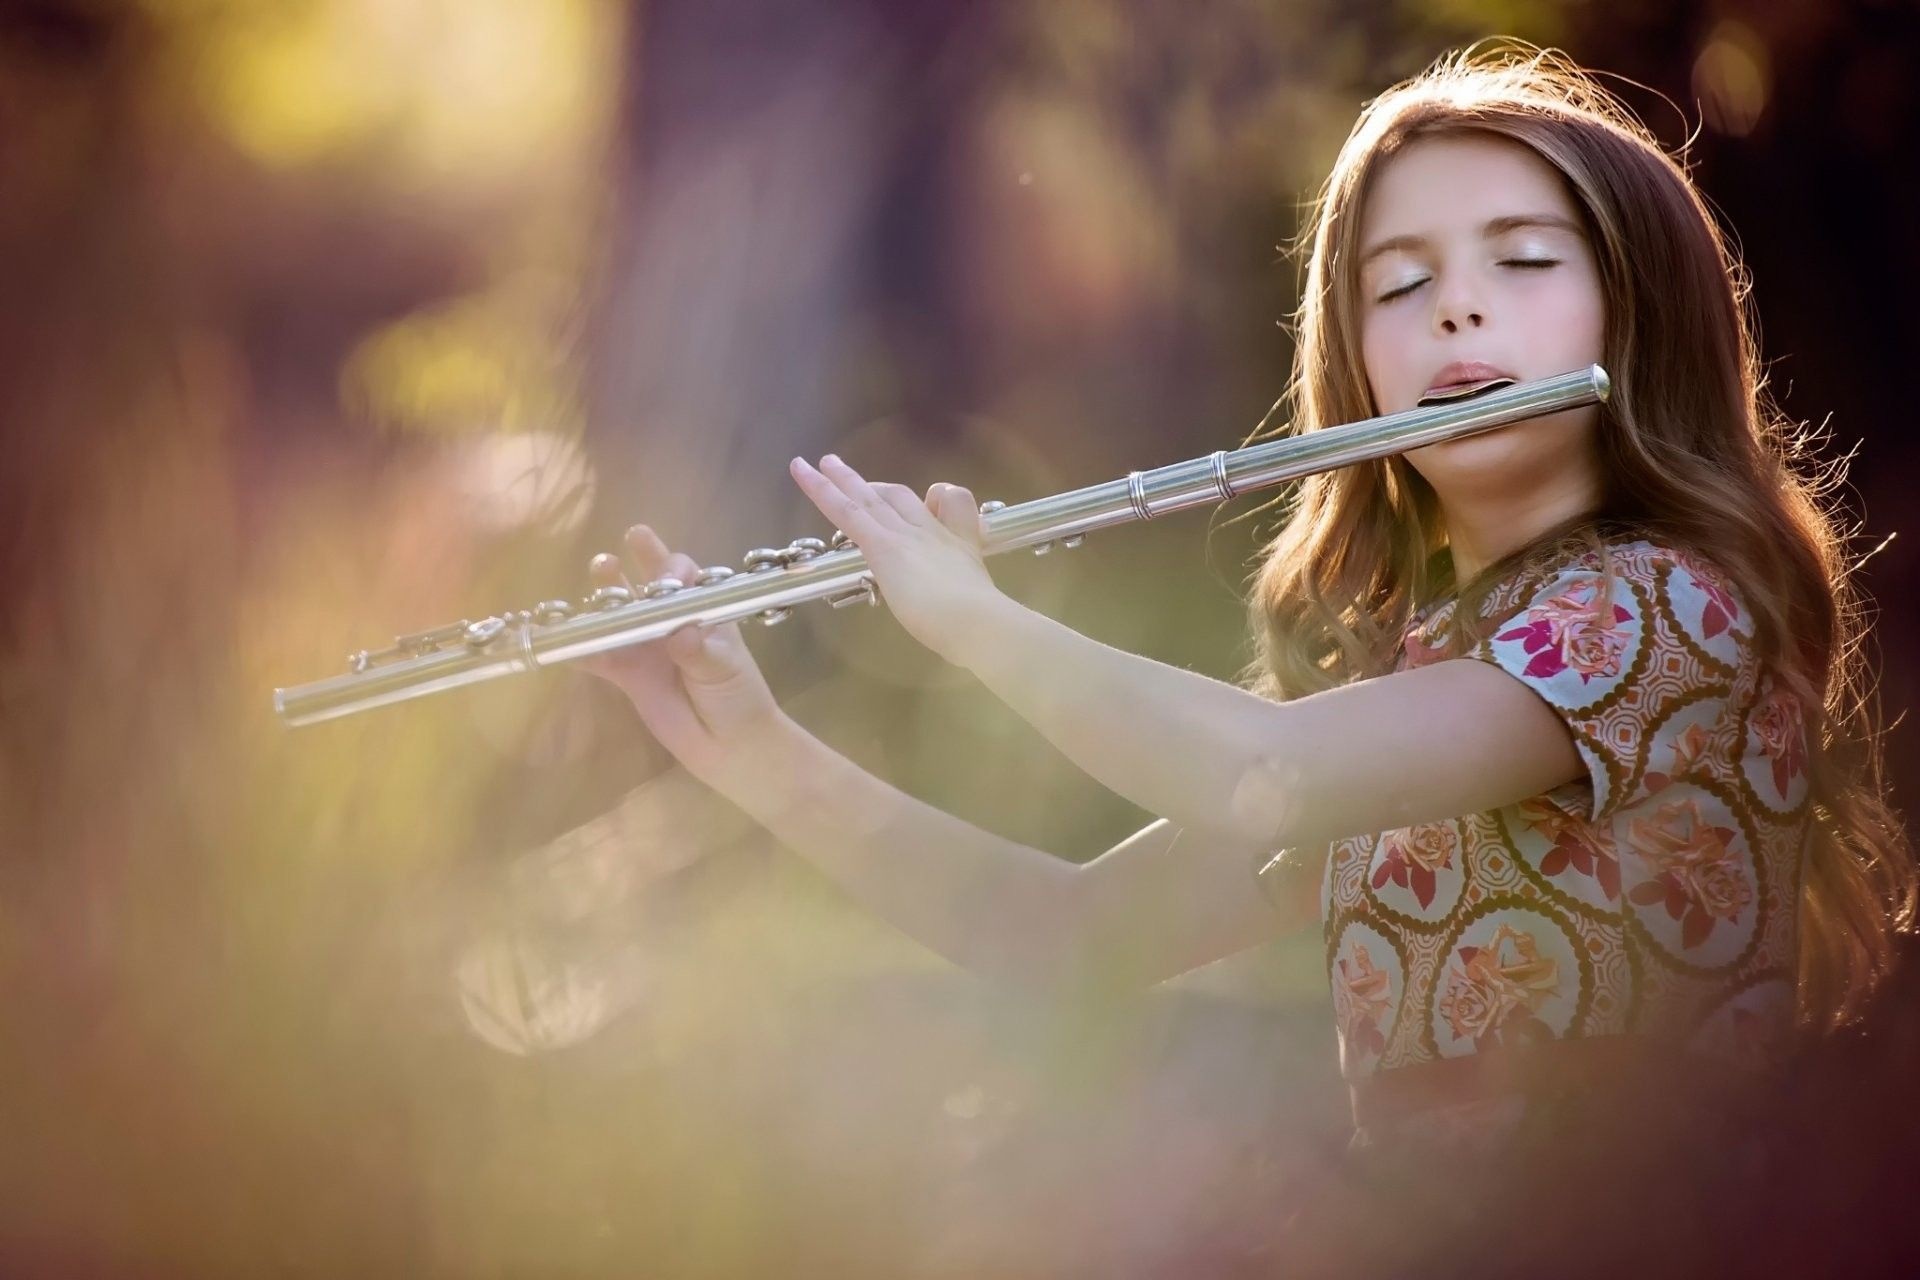 Flute: Girl playing music, A woodwind instrument of edge-blown aerophone category. 1920x1280 HD Wallpaper.